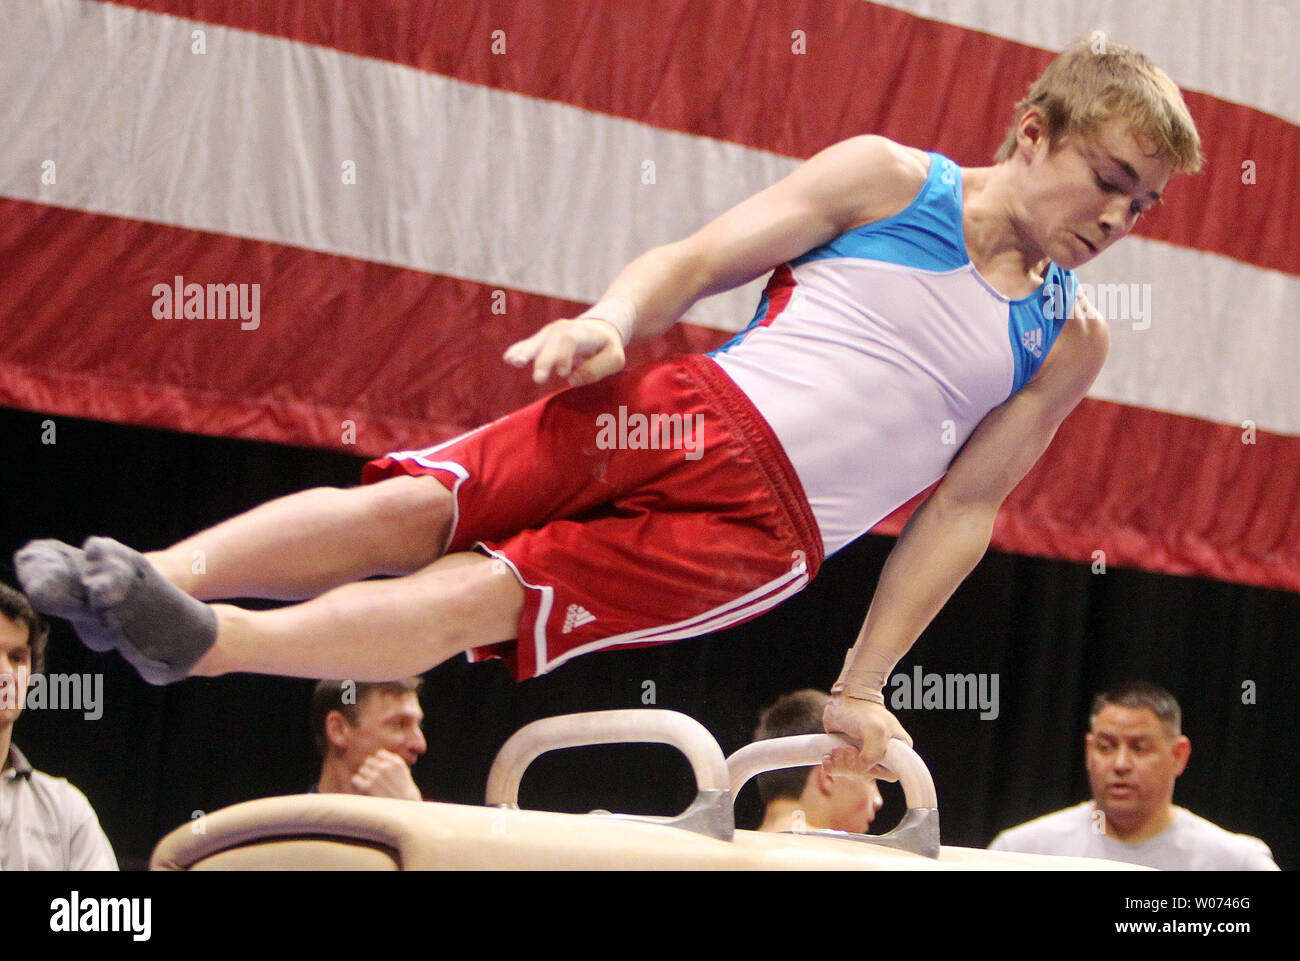 US Junior and Senior Championships to kick off in Saint Louis